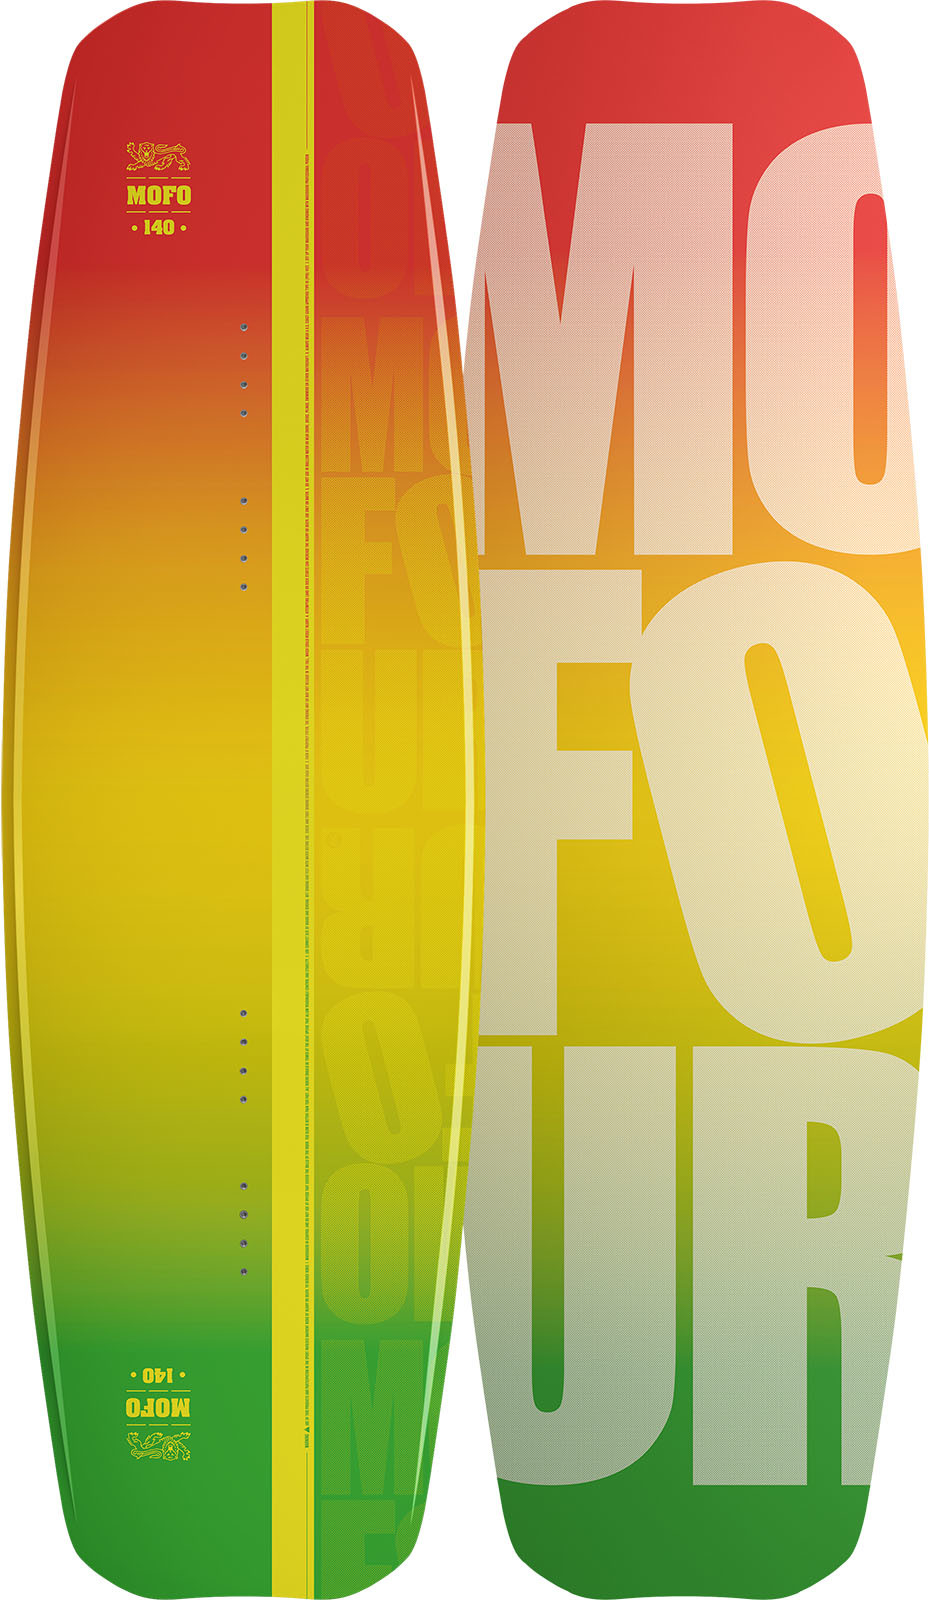 mofour wakeboards 2018 mofo